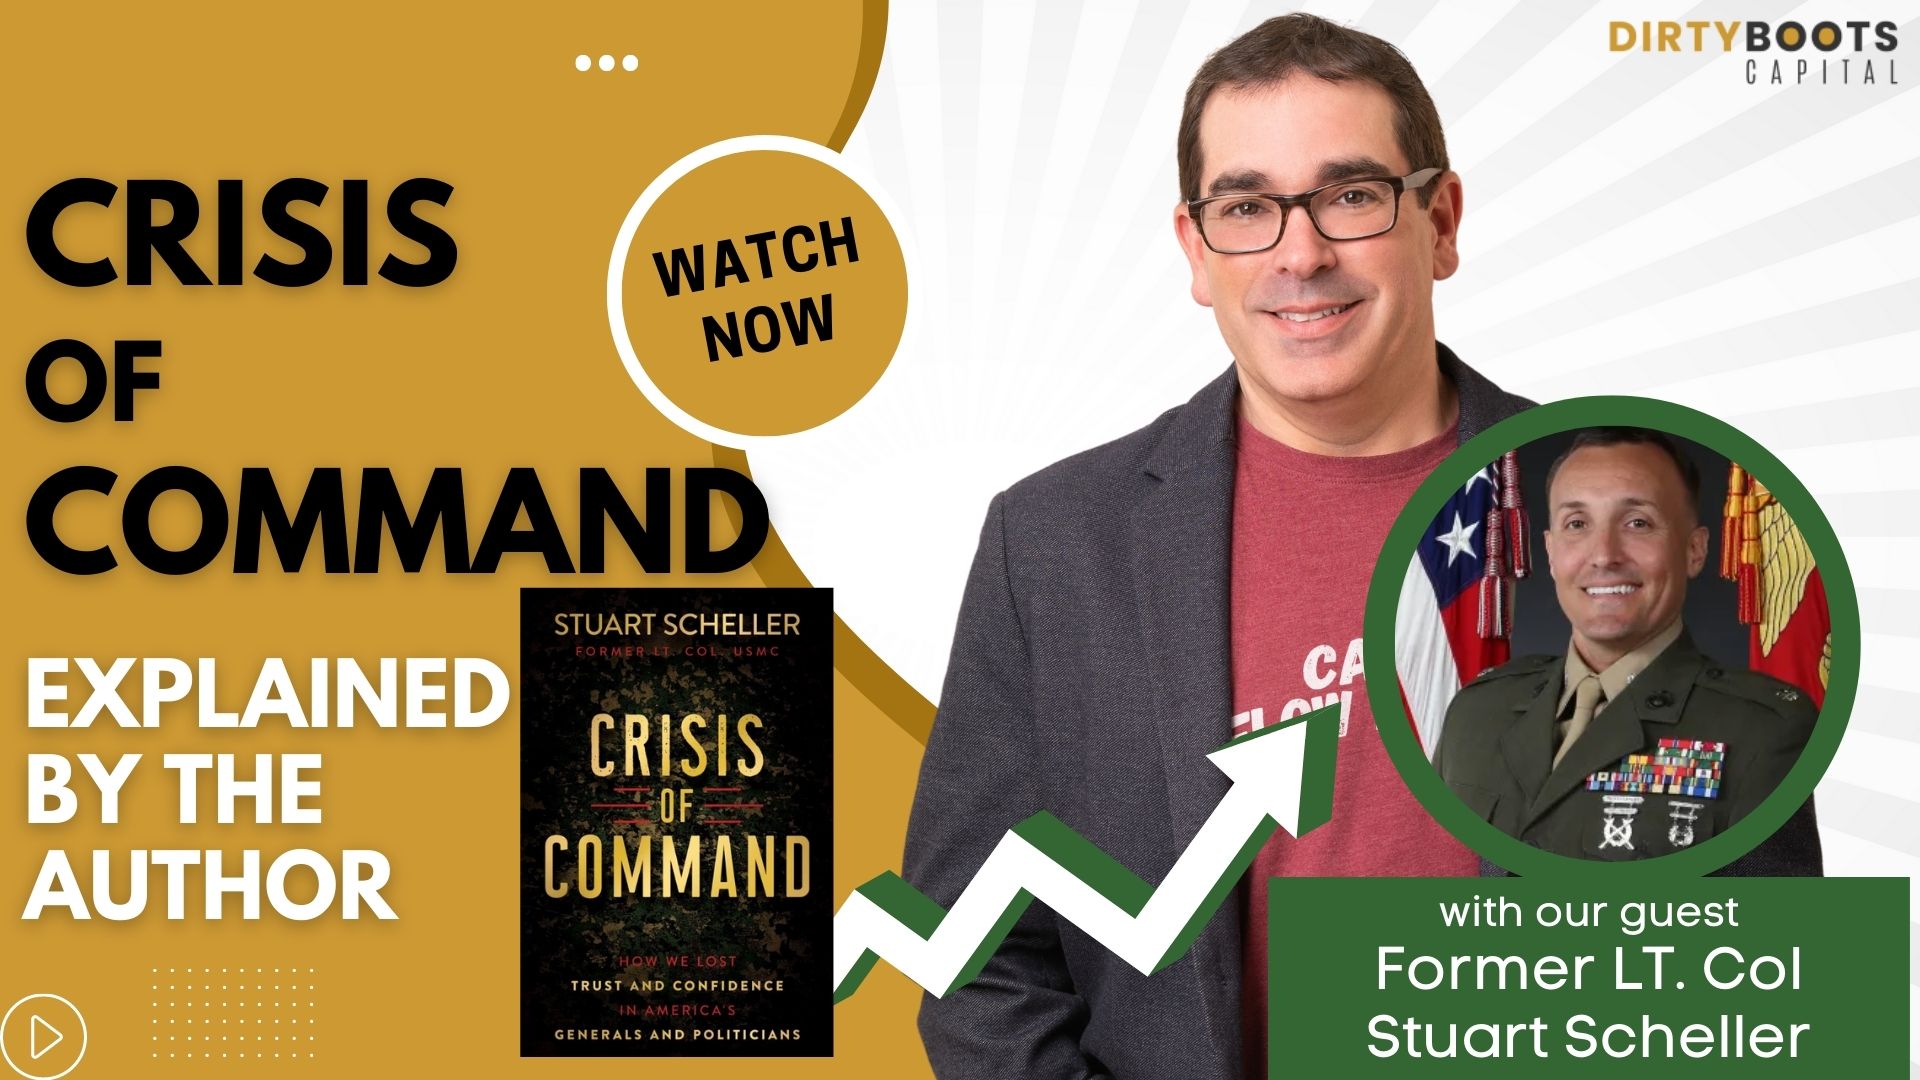 Crisis of Command: How We Lost Trust and Confidence in America's Generals  and Politicians|Hardcover